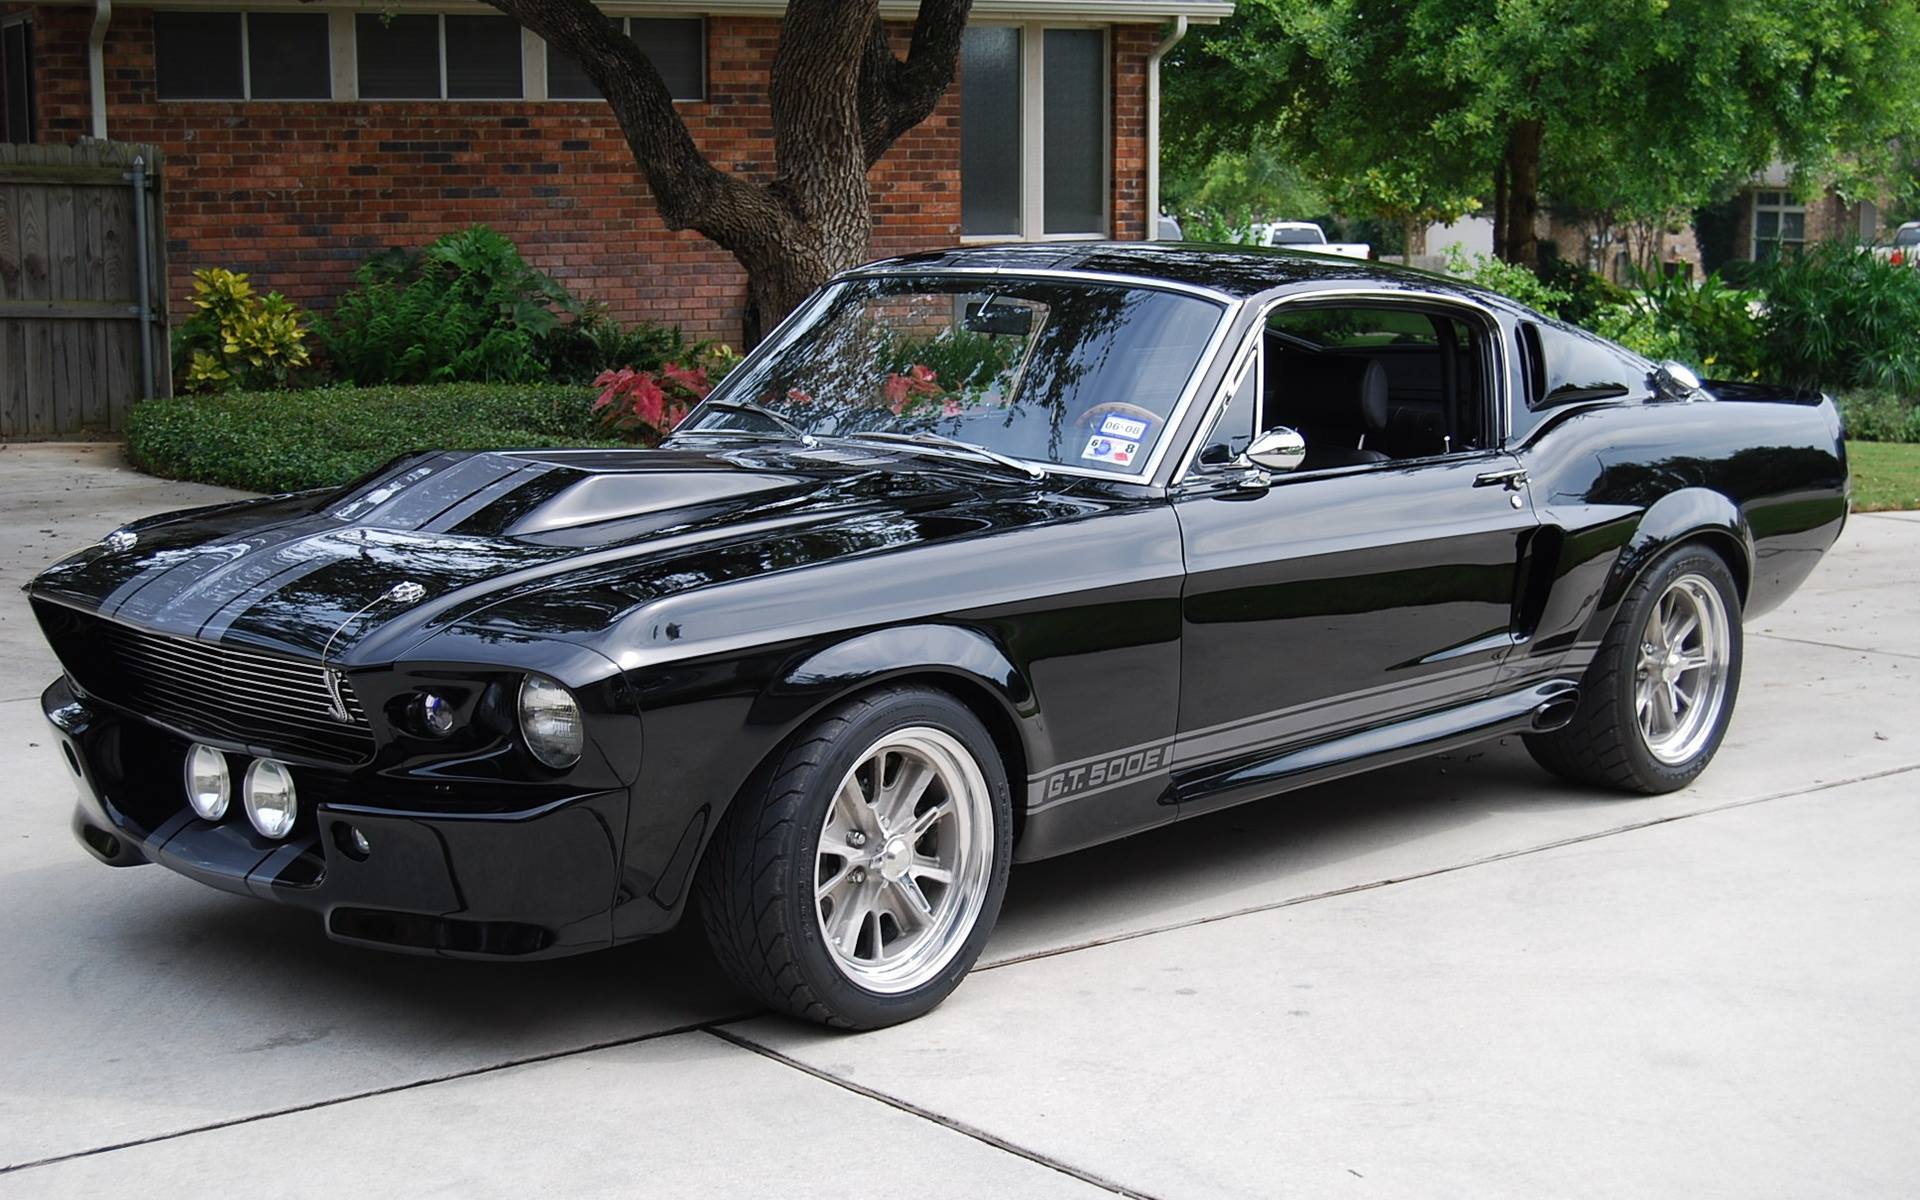 Ford Mustang Shelby Gt500 Eleanor I